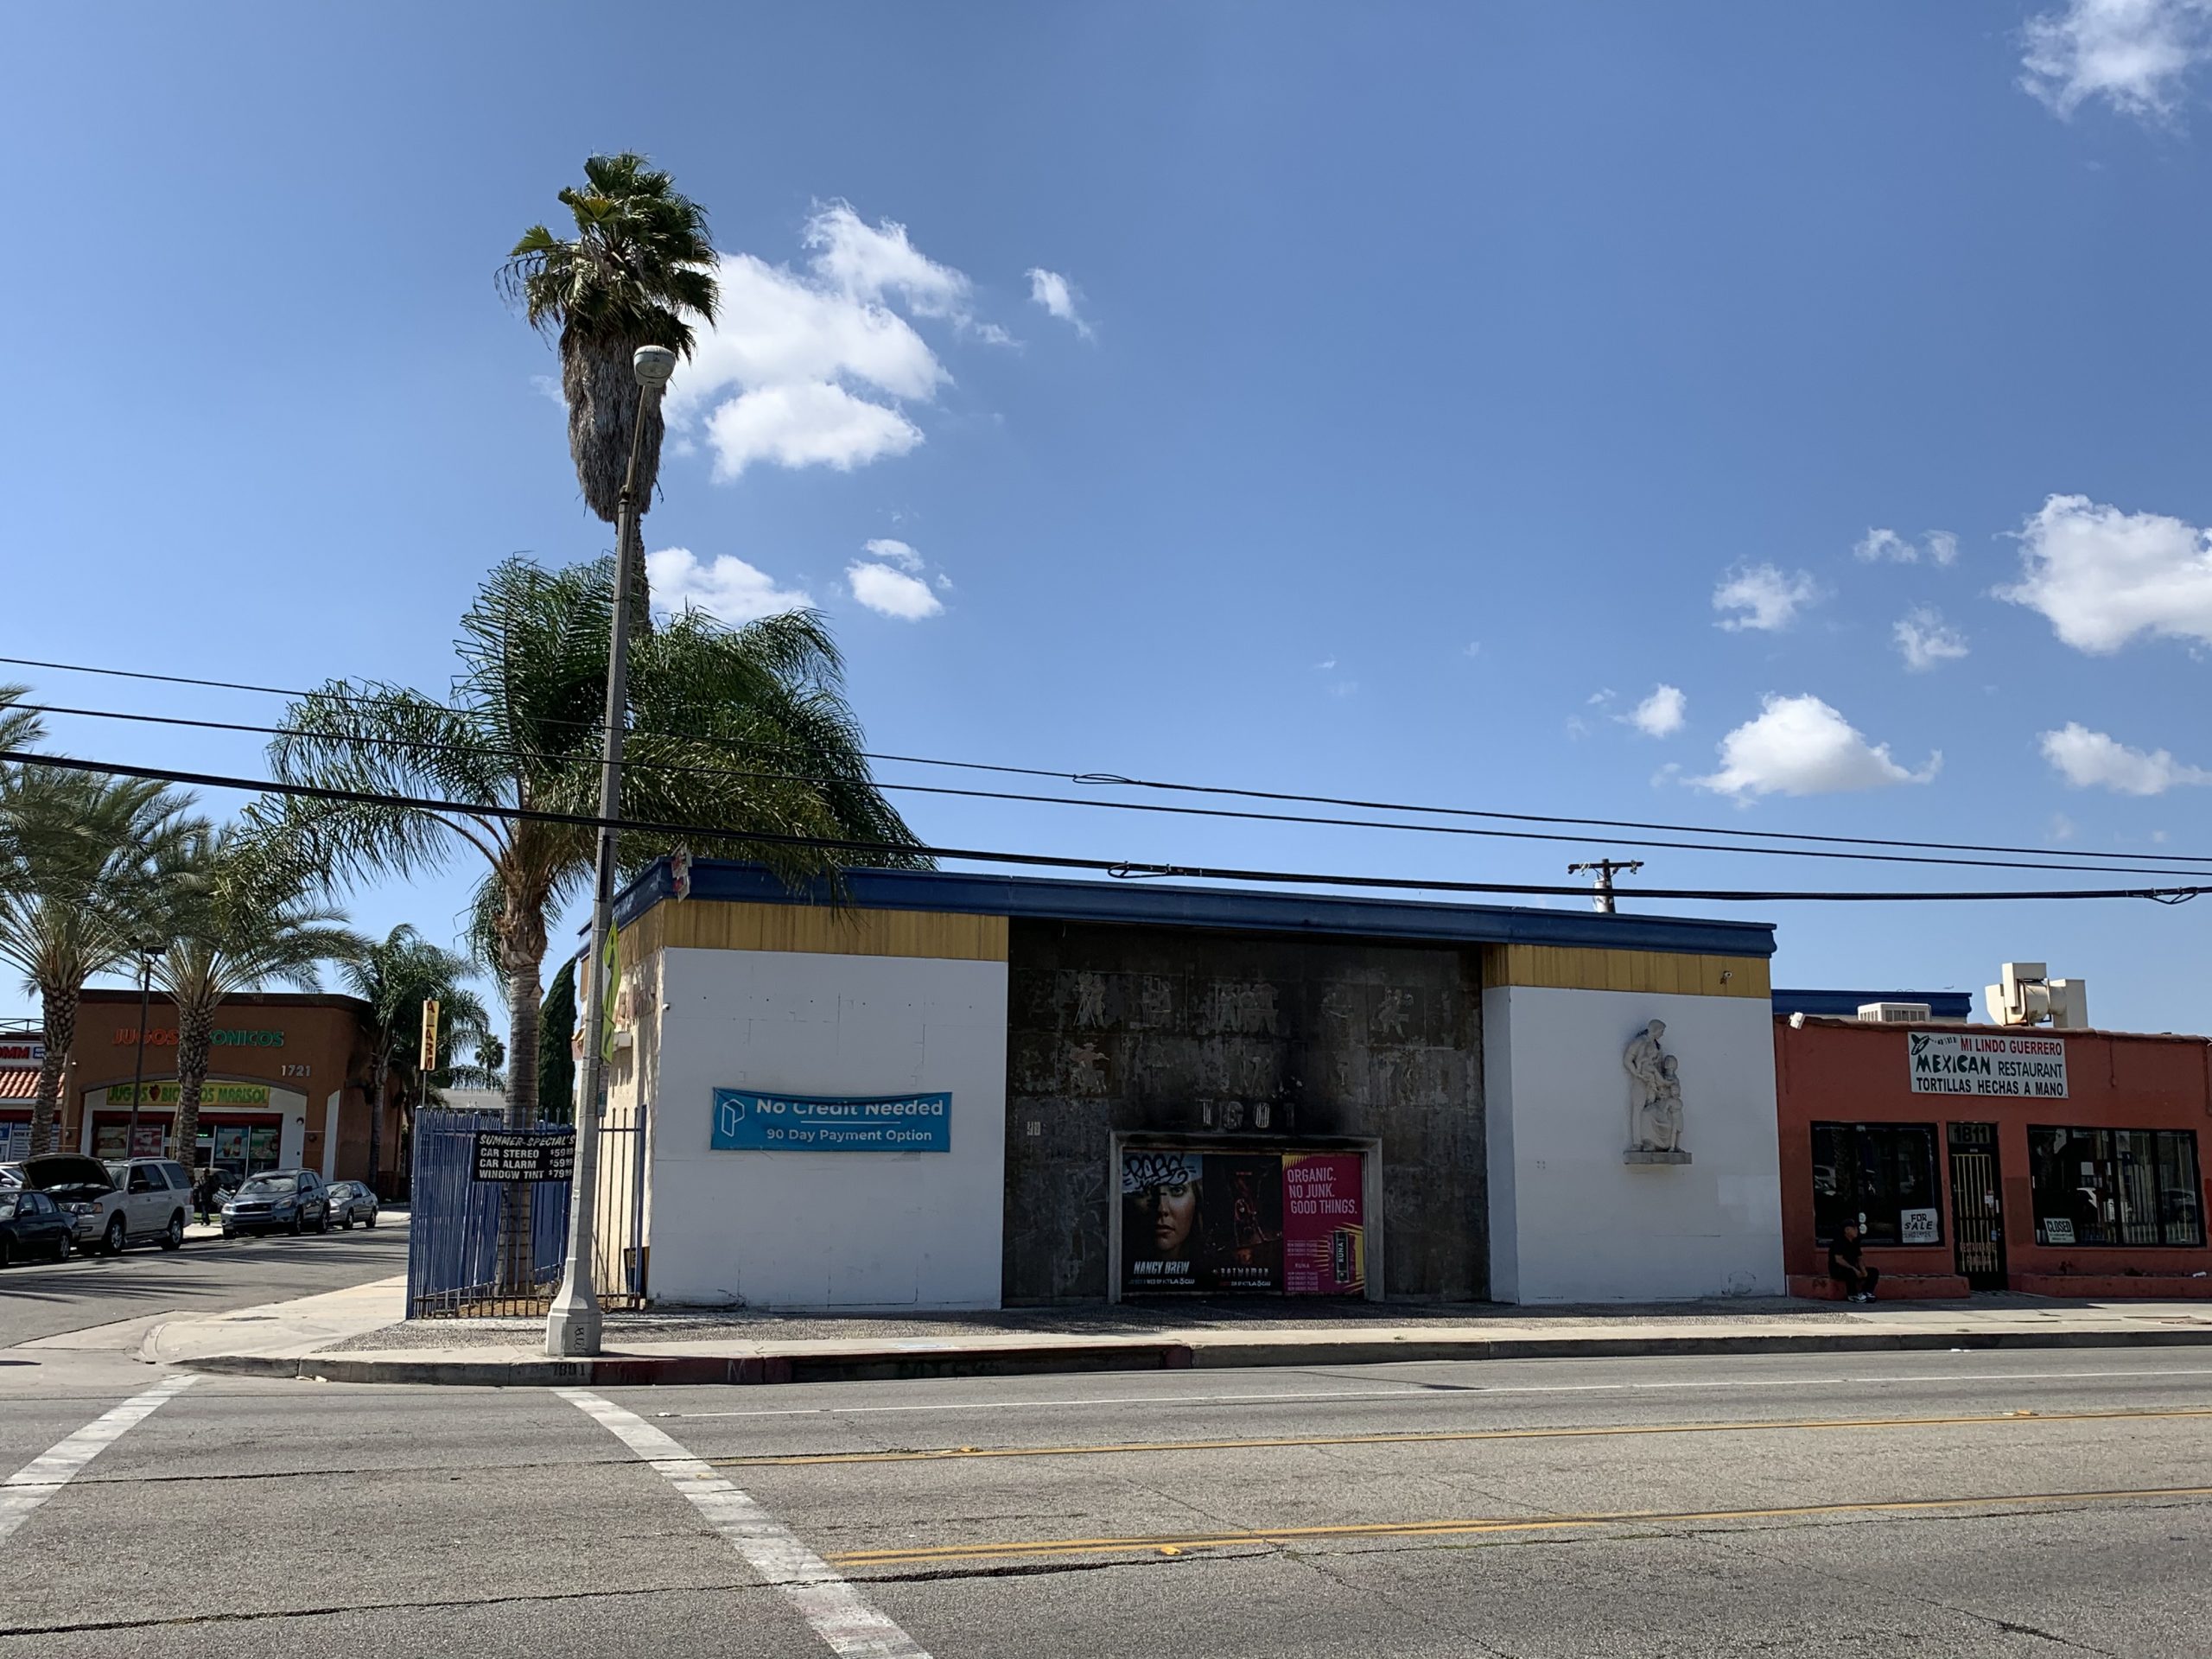 Millard Sheets Studio, Compton branch for Home Savings, completed 1958. Photography by Michael Iwinski, 2019.